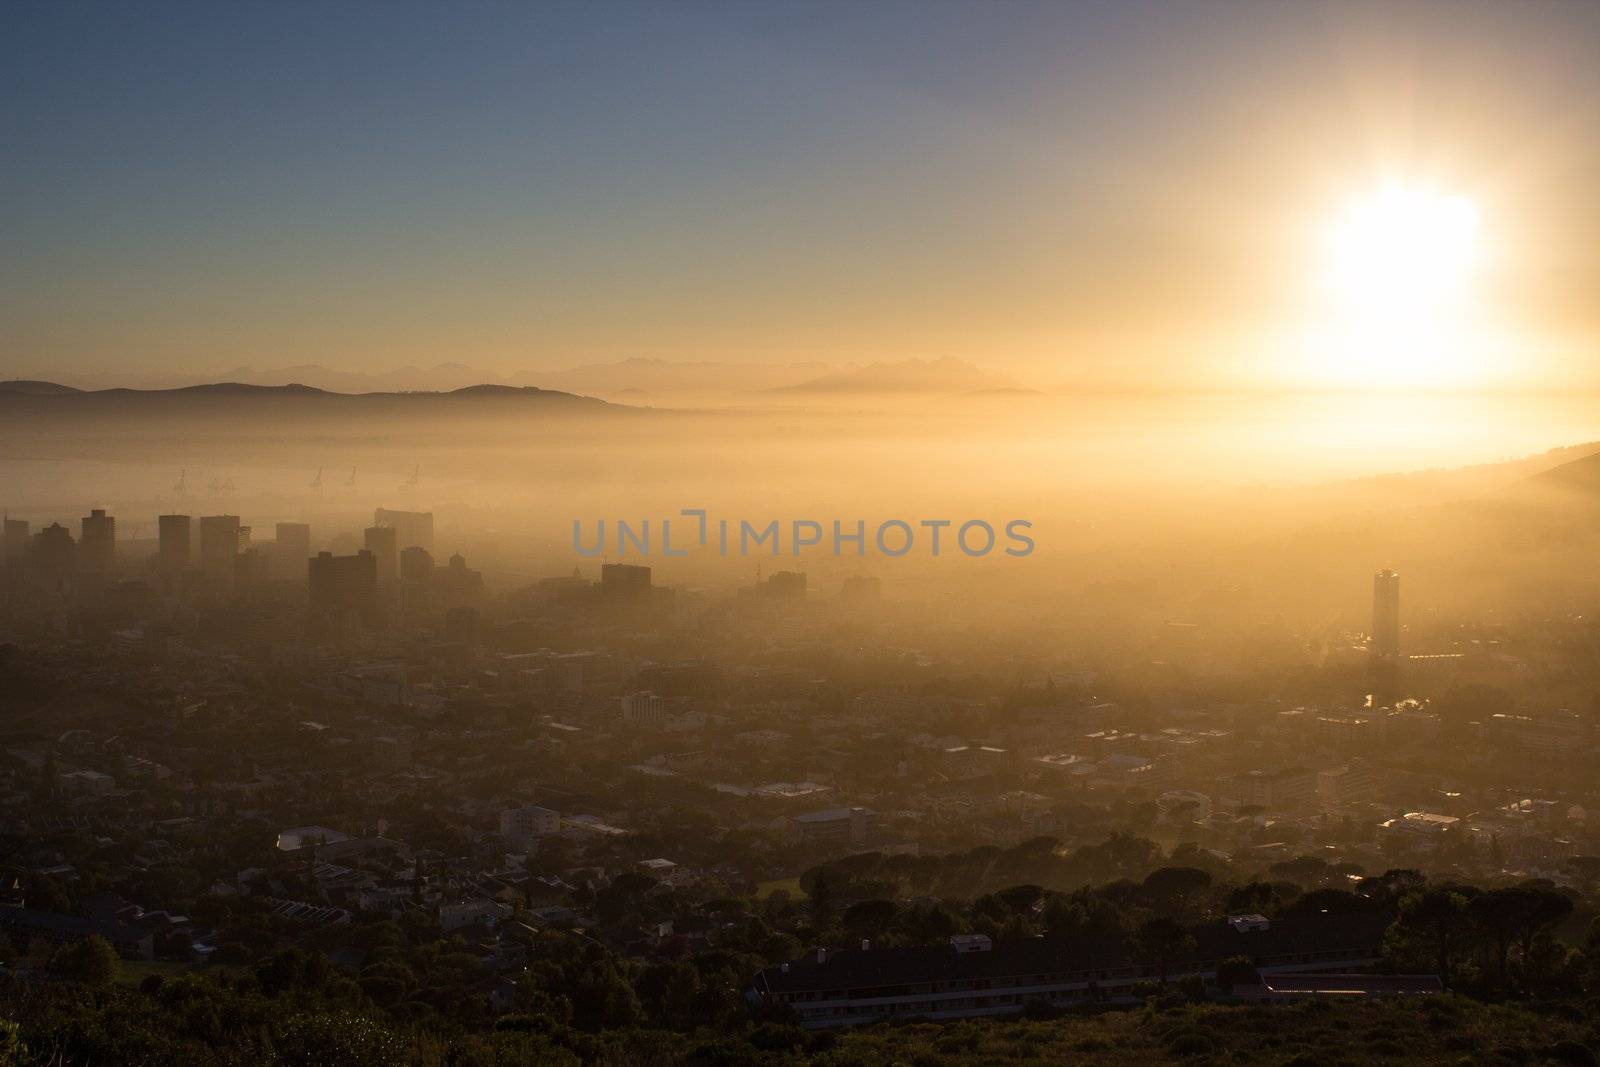 Photo Of Cape Town On A Misty Morning With Buildings Looking Through The Fog